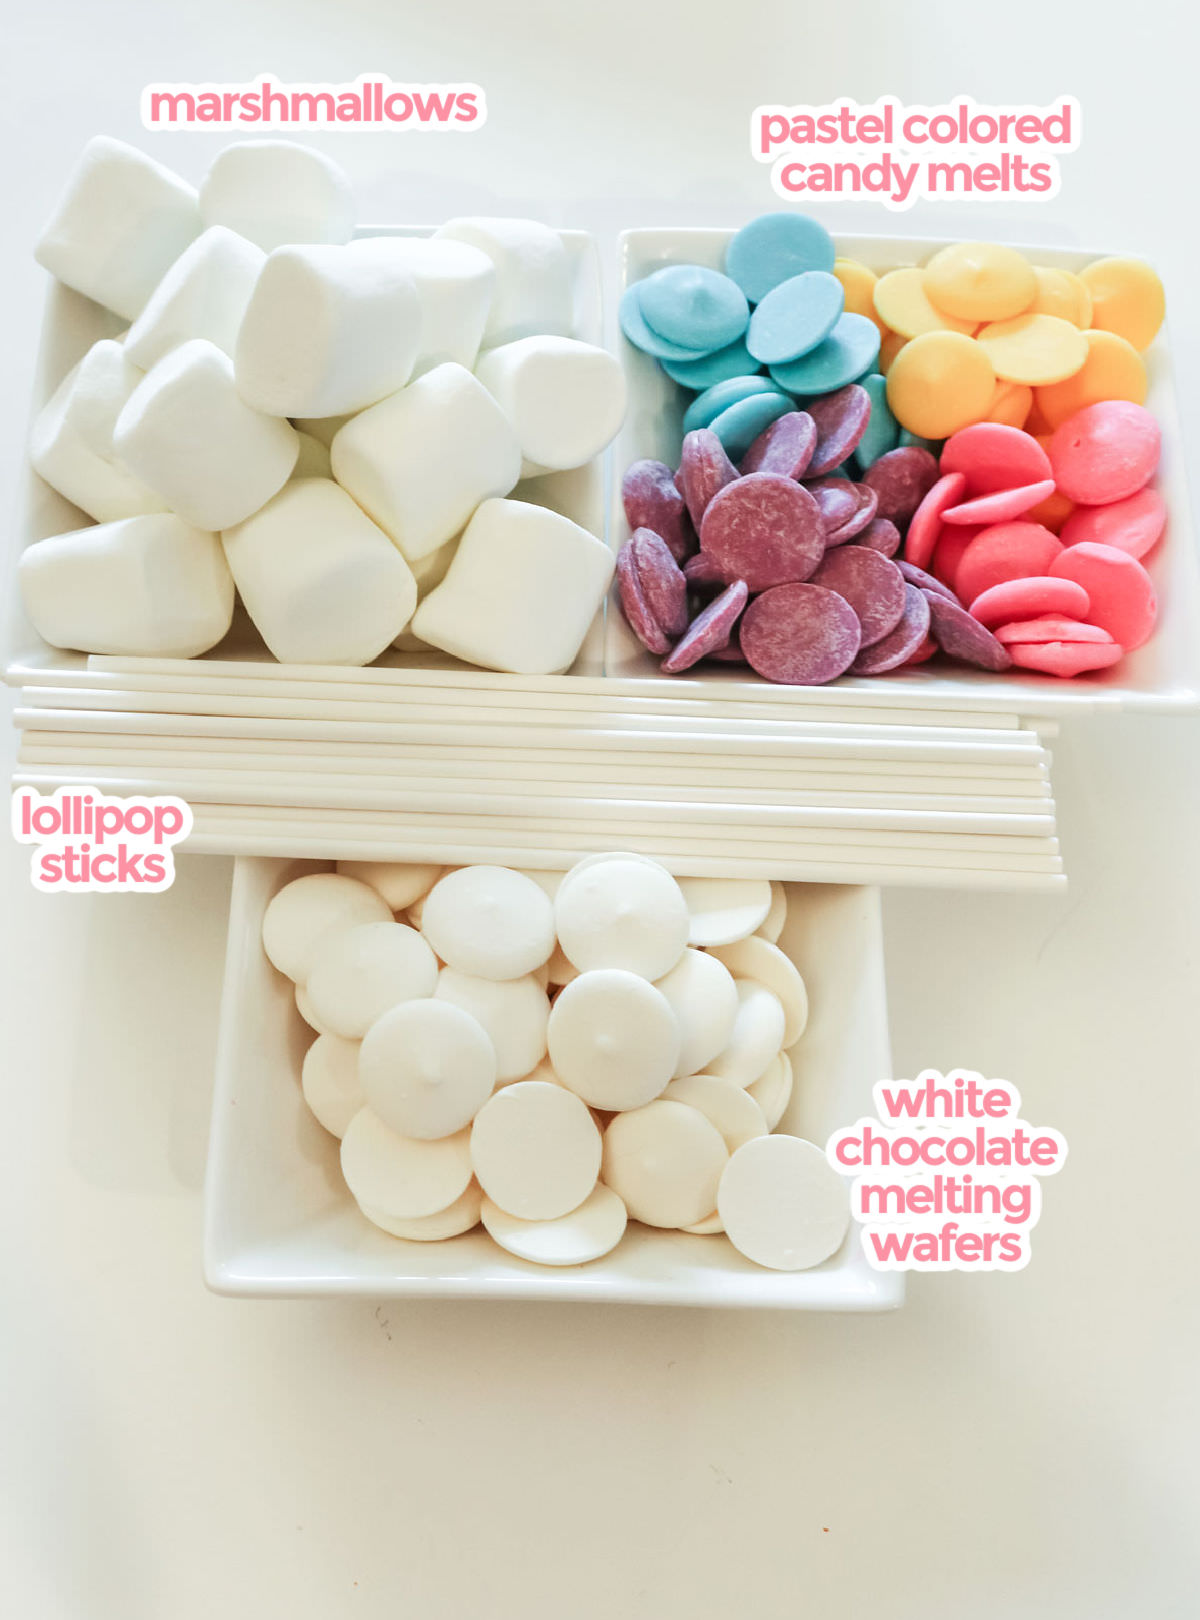 All the ingredients necessary to make Celebration Marshmallow Pops including marshmallows, lollipop sticks, white chocolate melting wafters and pastel colored candy melts.